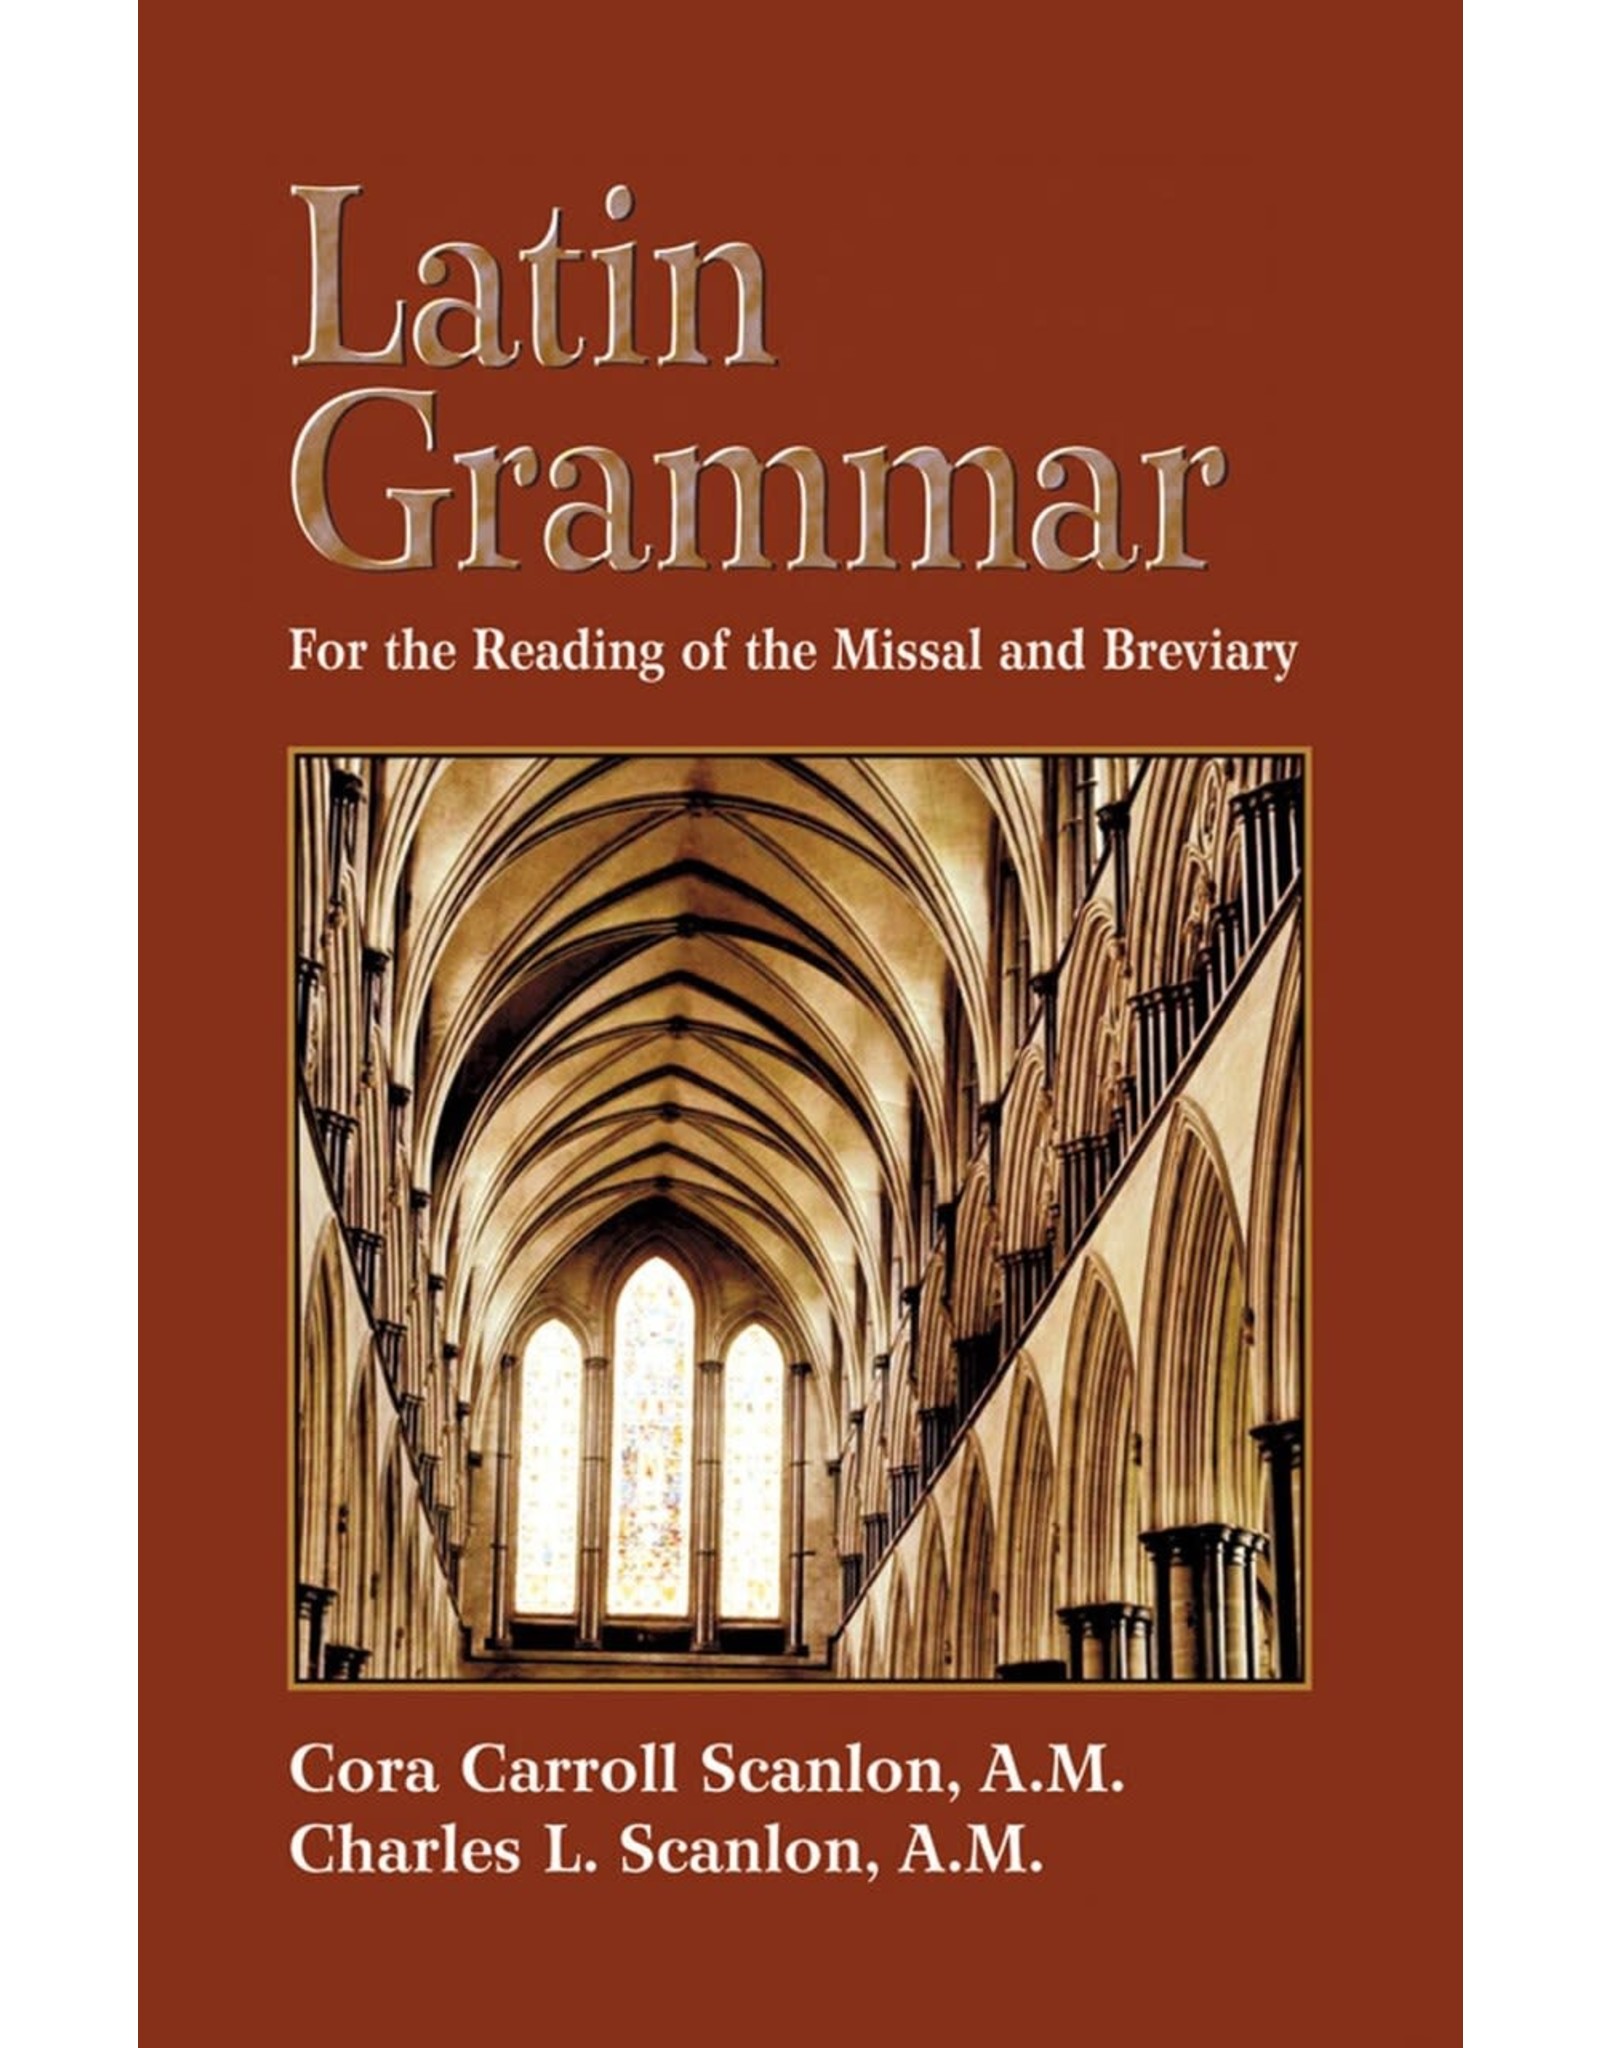 Tan Books Latin Grammar: Grammar, Vocabularies, And Exercises In Preparation For The Reading Of The Missal And Breviary by Cora Carroll Scanlon, A.M. (Paperback)